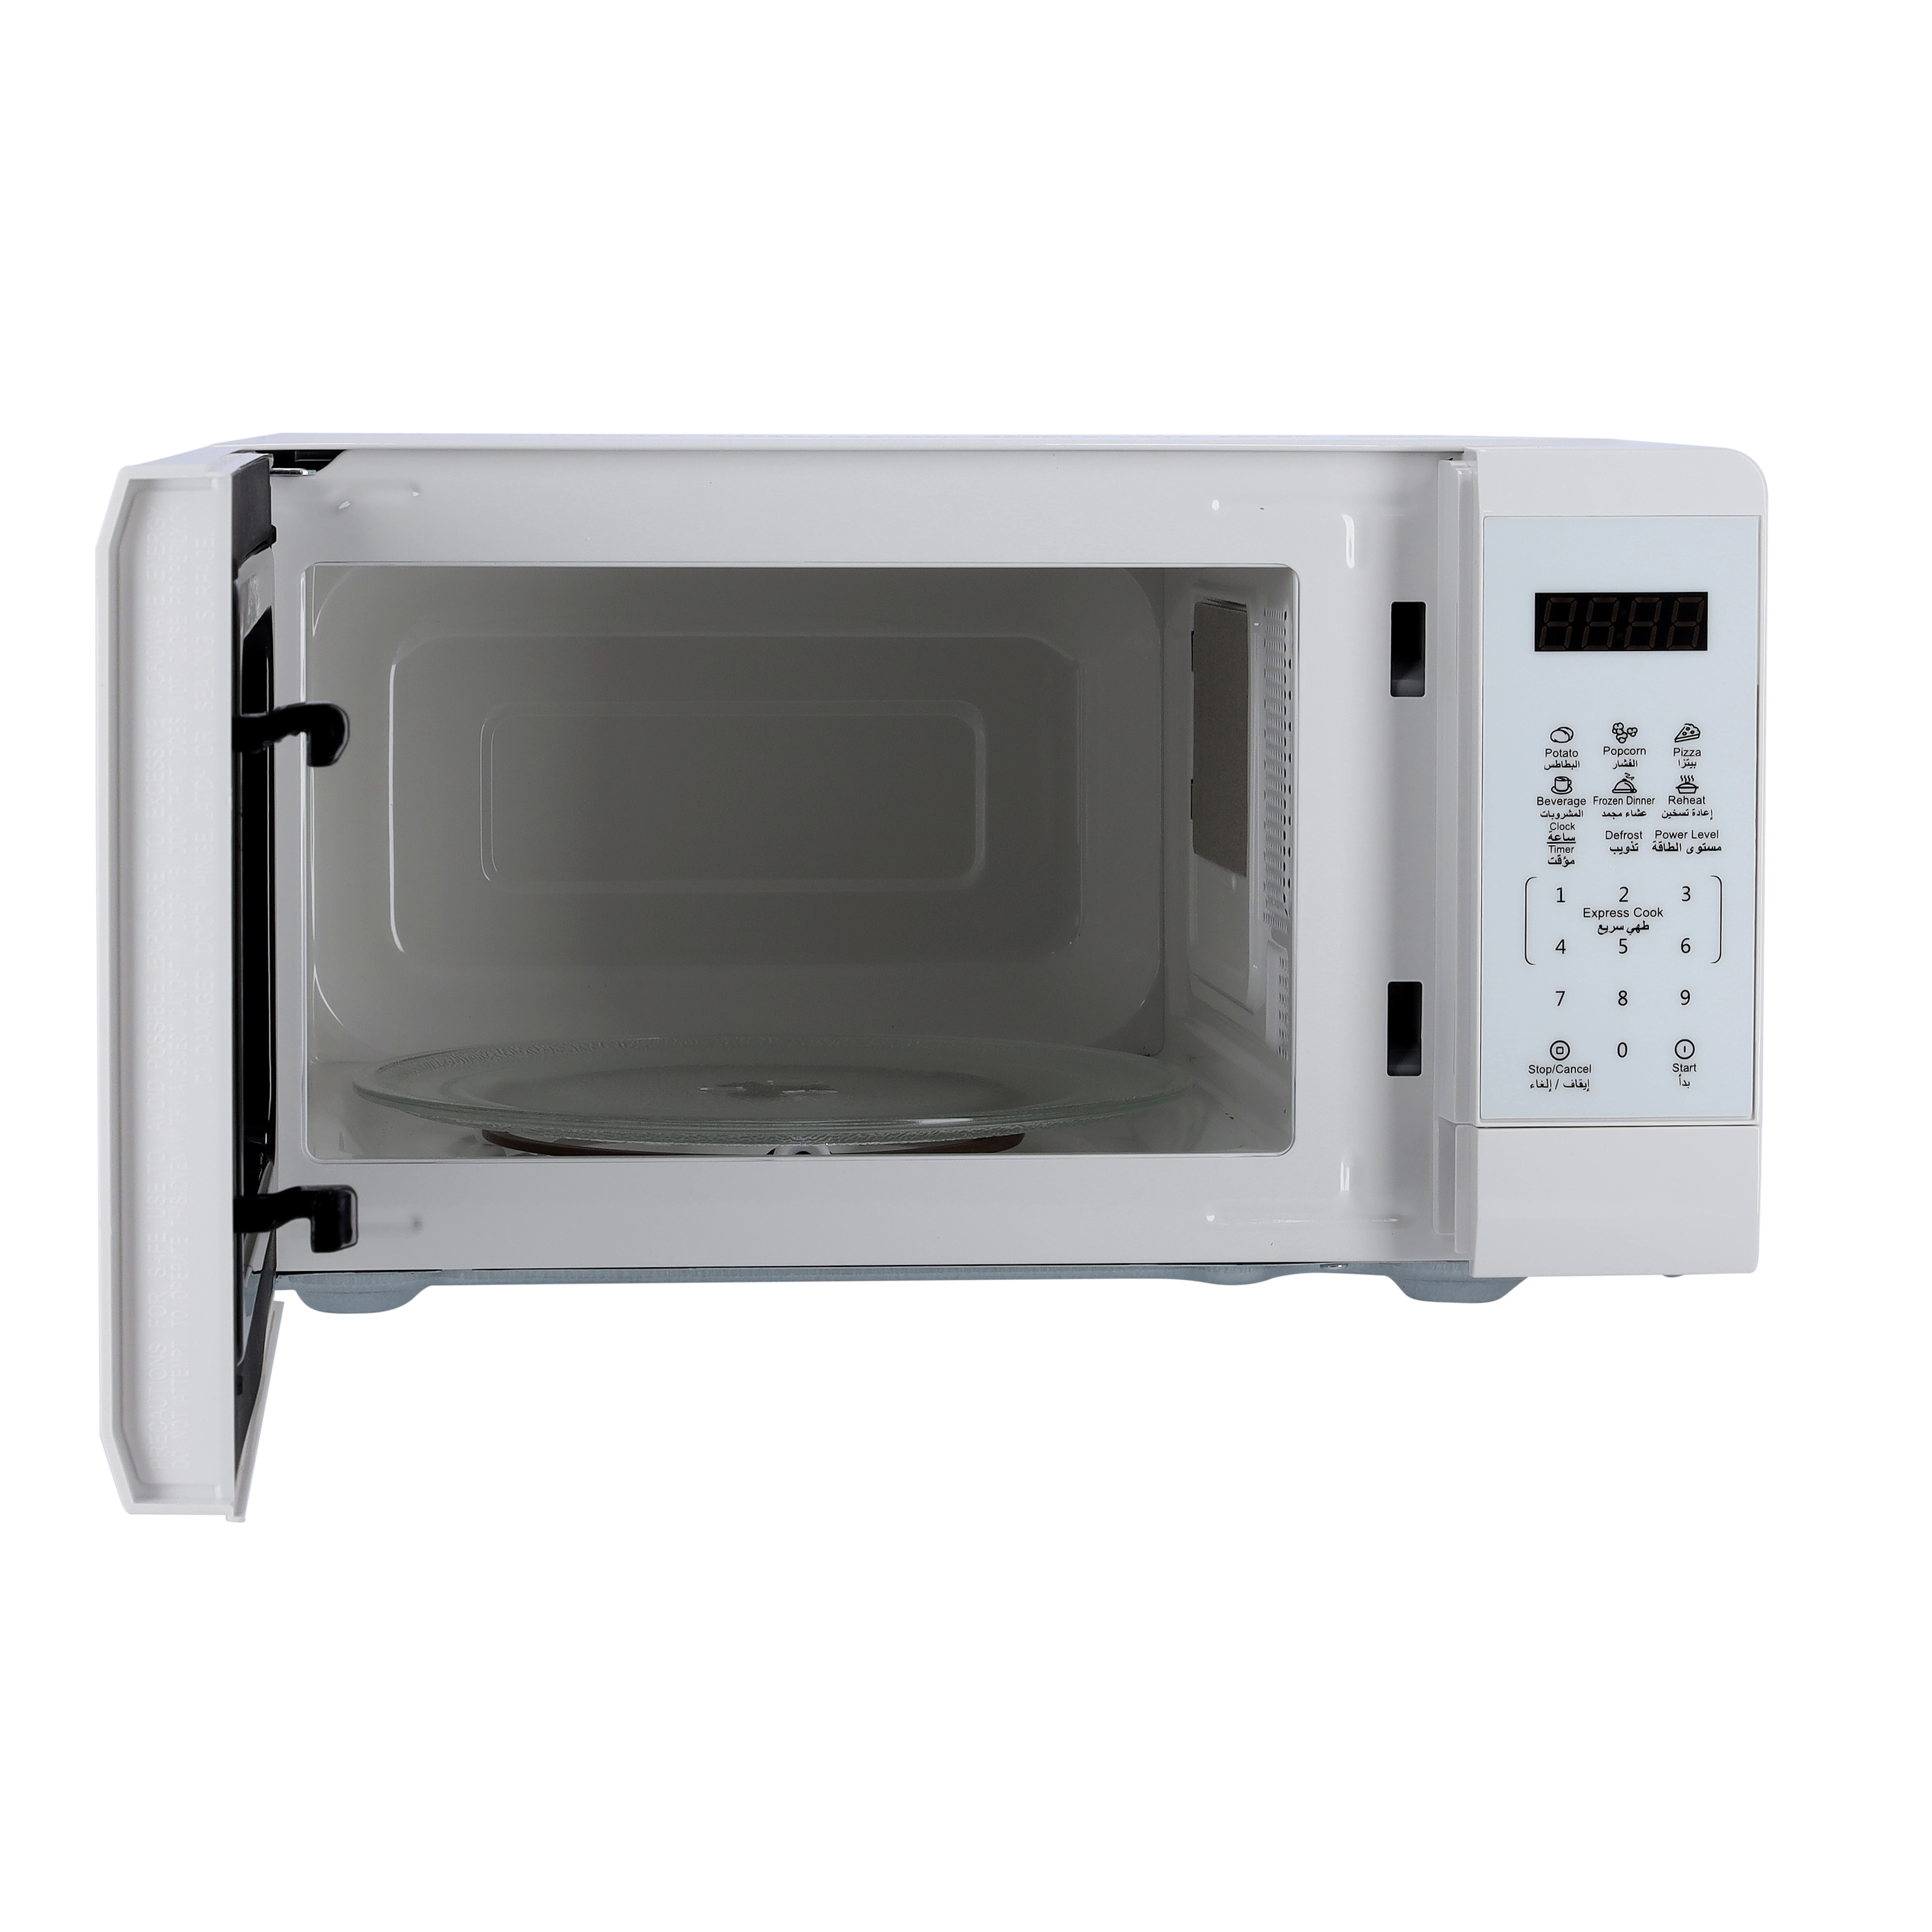 SIA MTM20WH 20L Freestanding 700W White Mechanical Timer Microwave Oven 